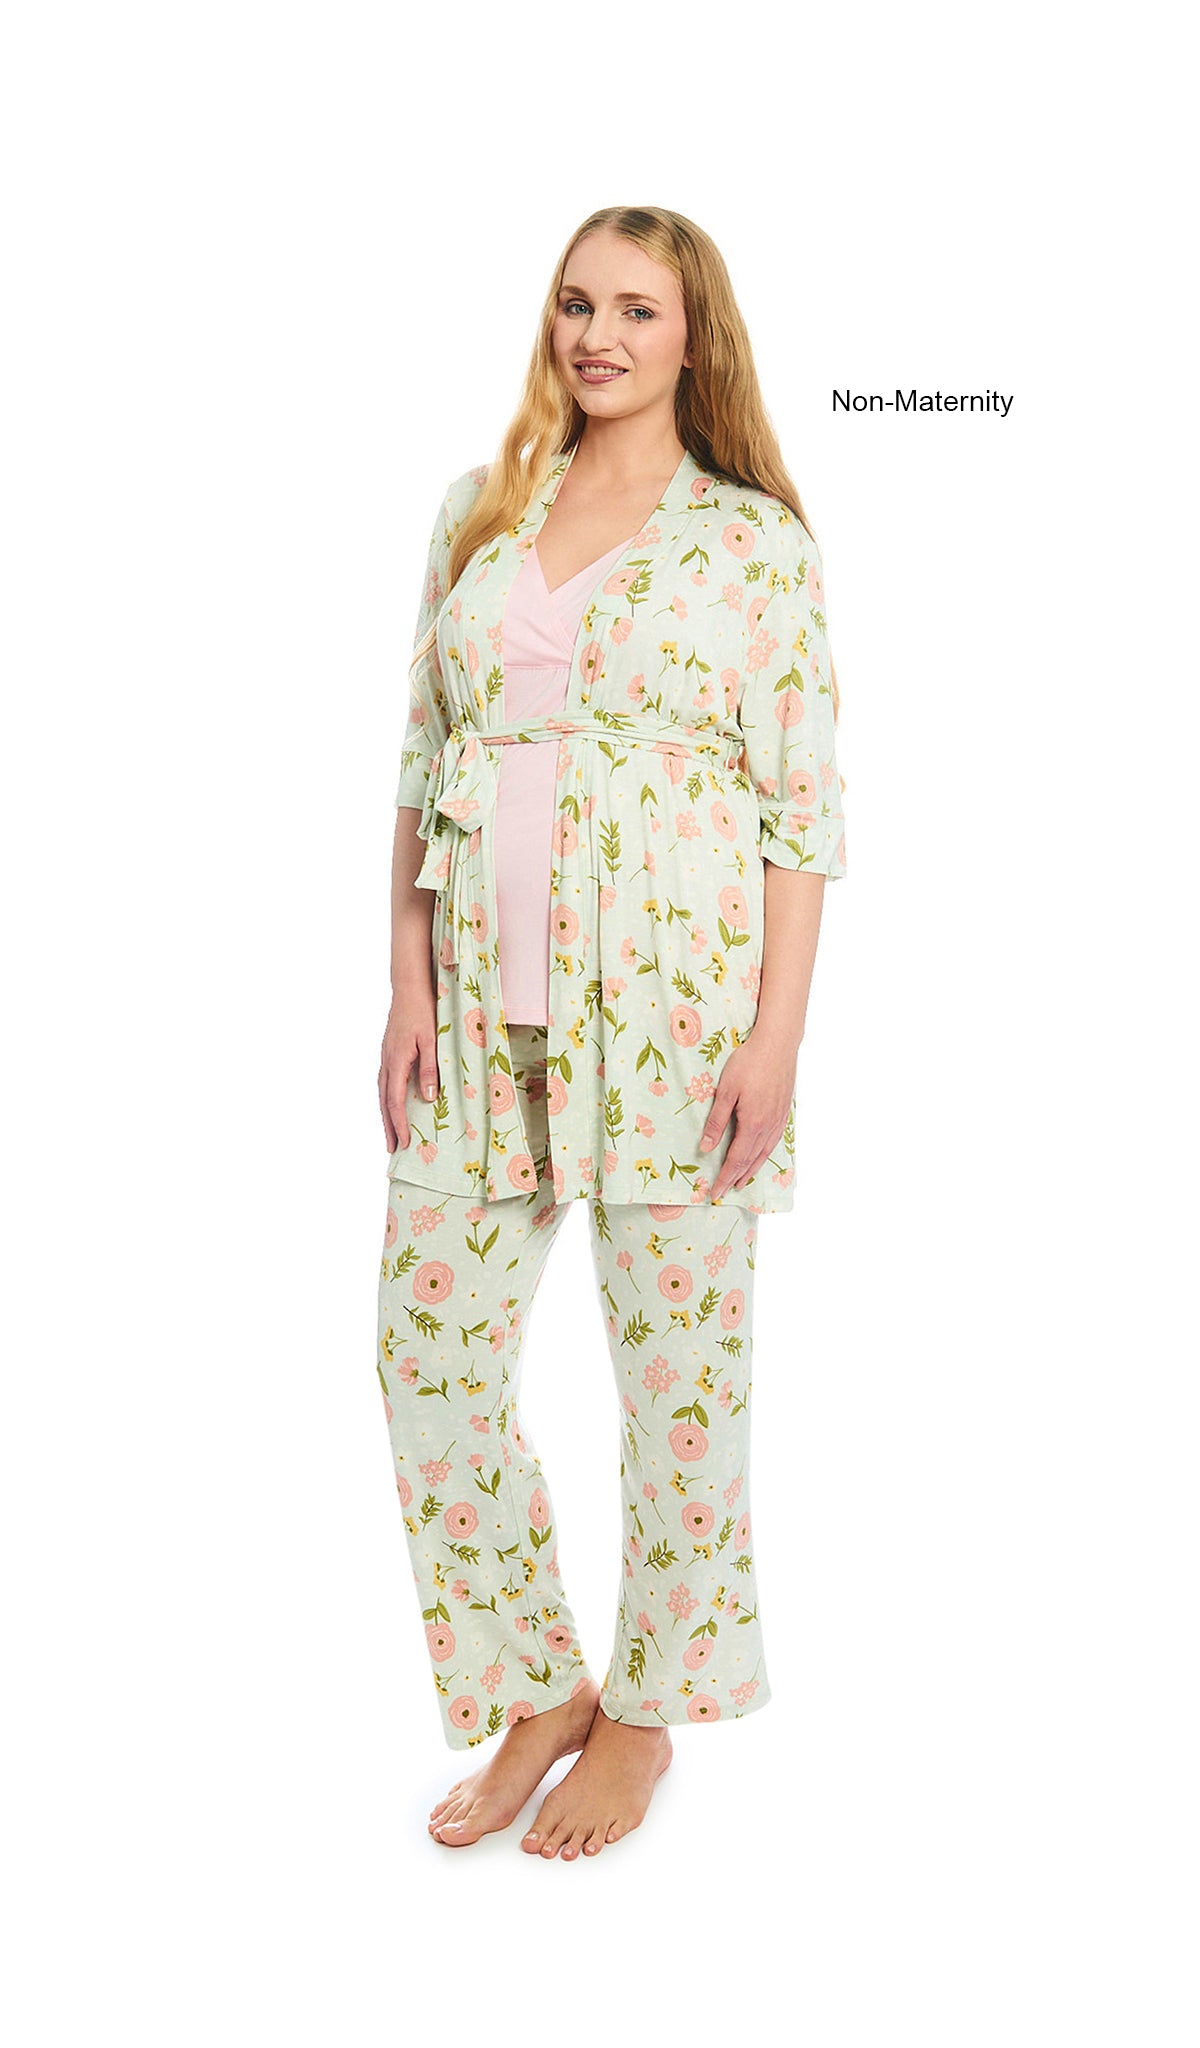 Carnation Analise 3-Piece Set. Woman wearing 3/4 sleeve robe, tank top and pant as non-maternity.